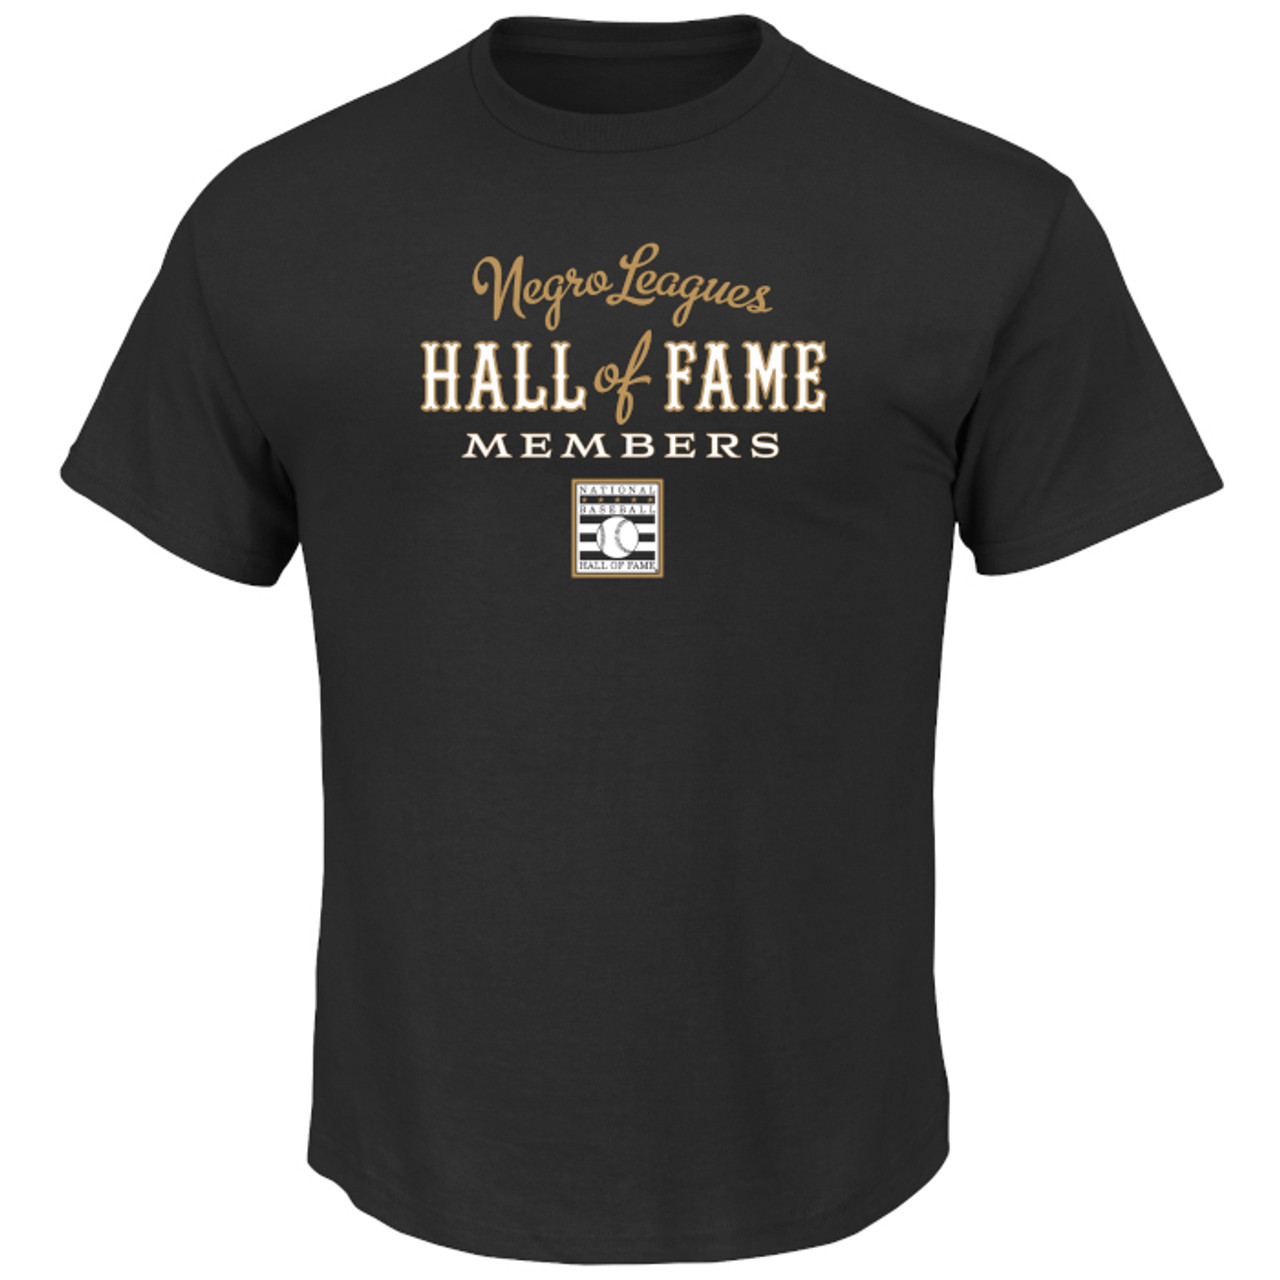 Men’s Teambrown Negro Leagues Hall of Famer Roster T-Shirt (2022)